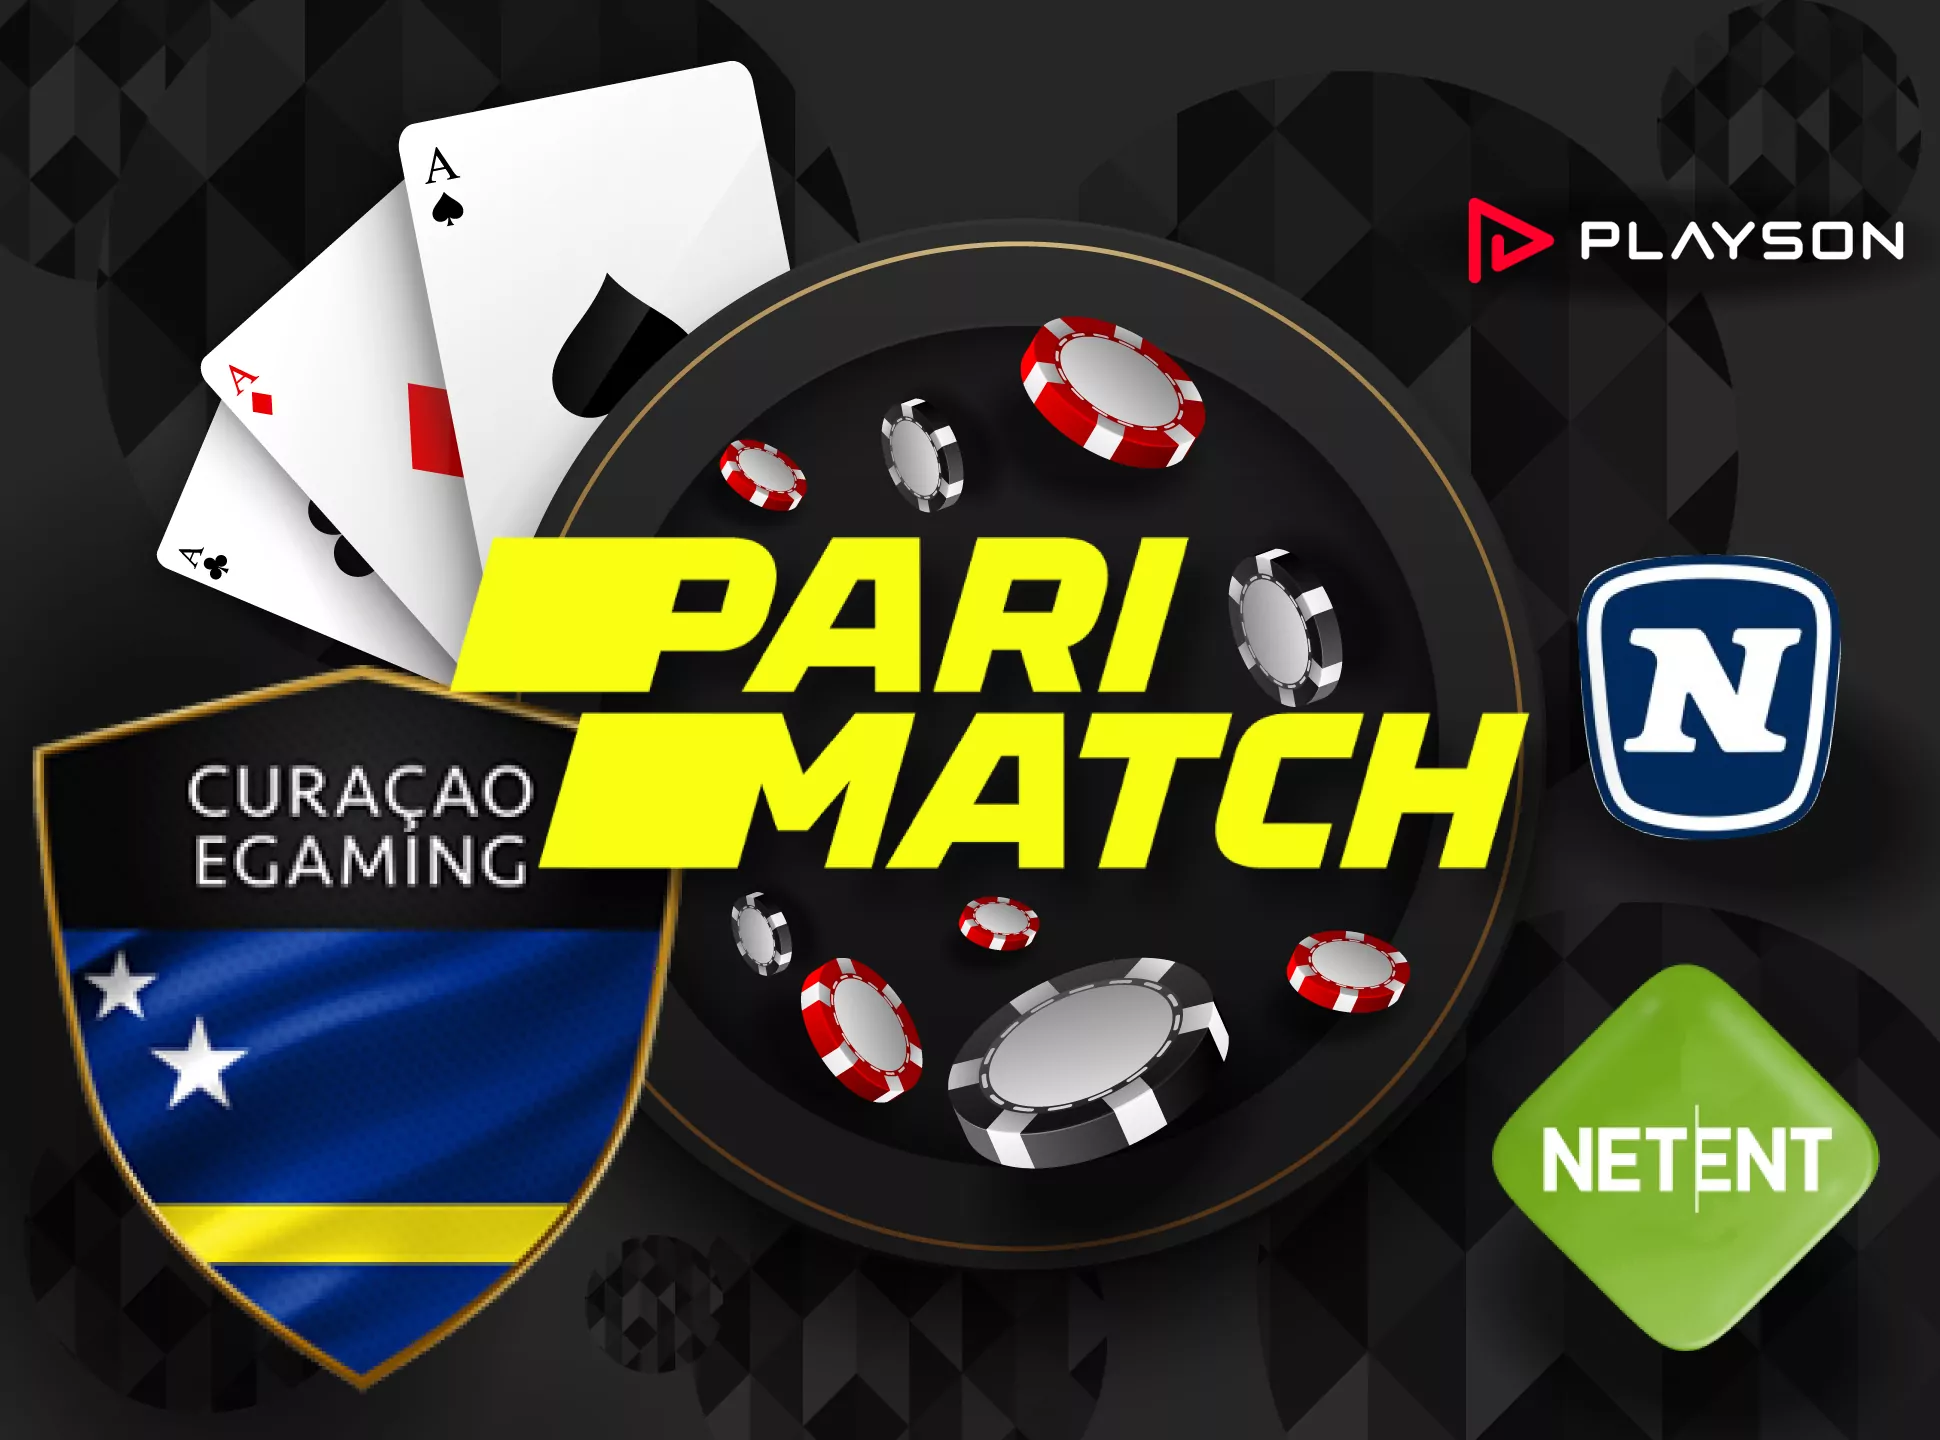 Register at one of the oldest and most famous online casino Parimatch.